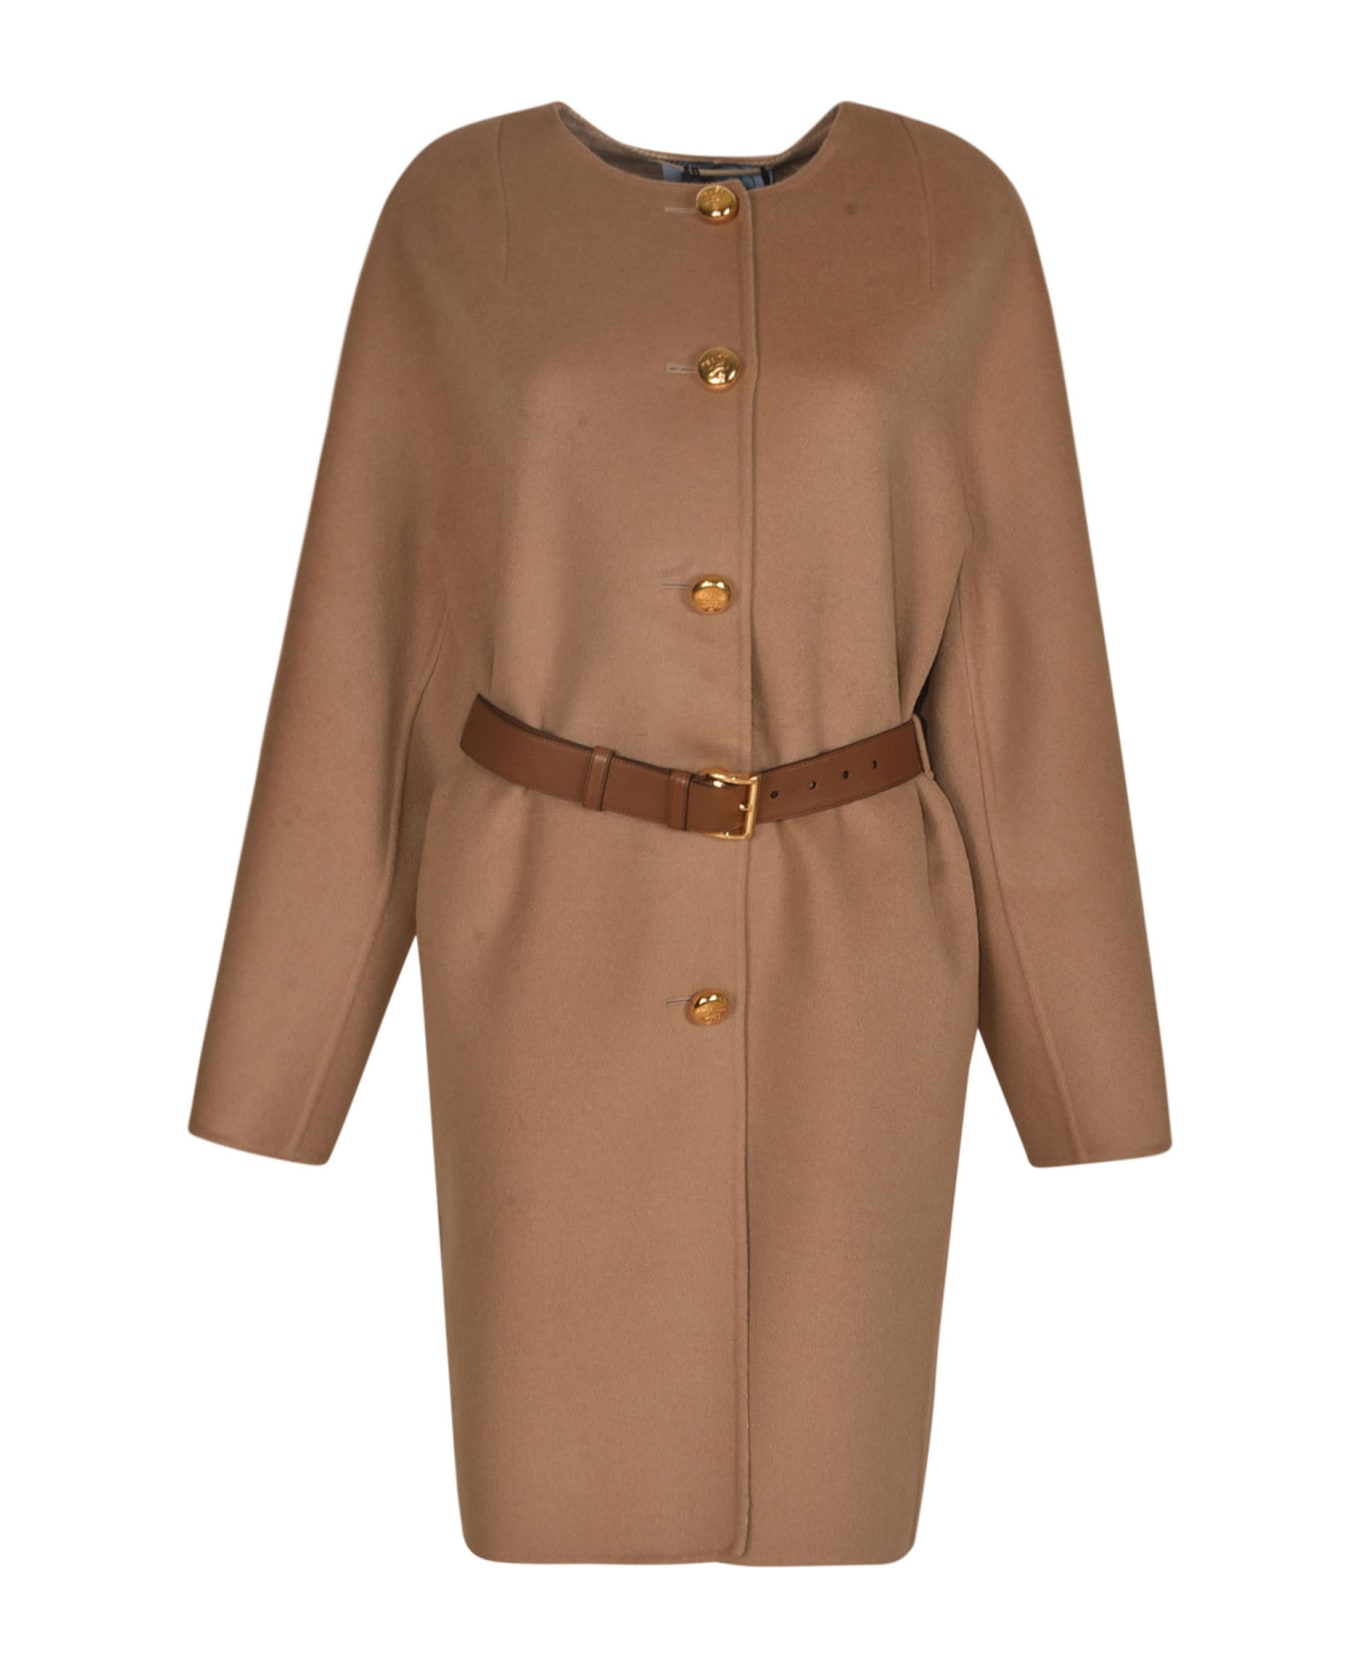 Prada Belted Buttoned Dress - Camel/White コート